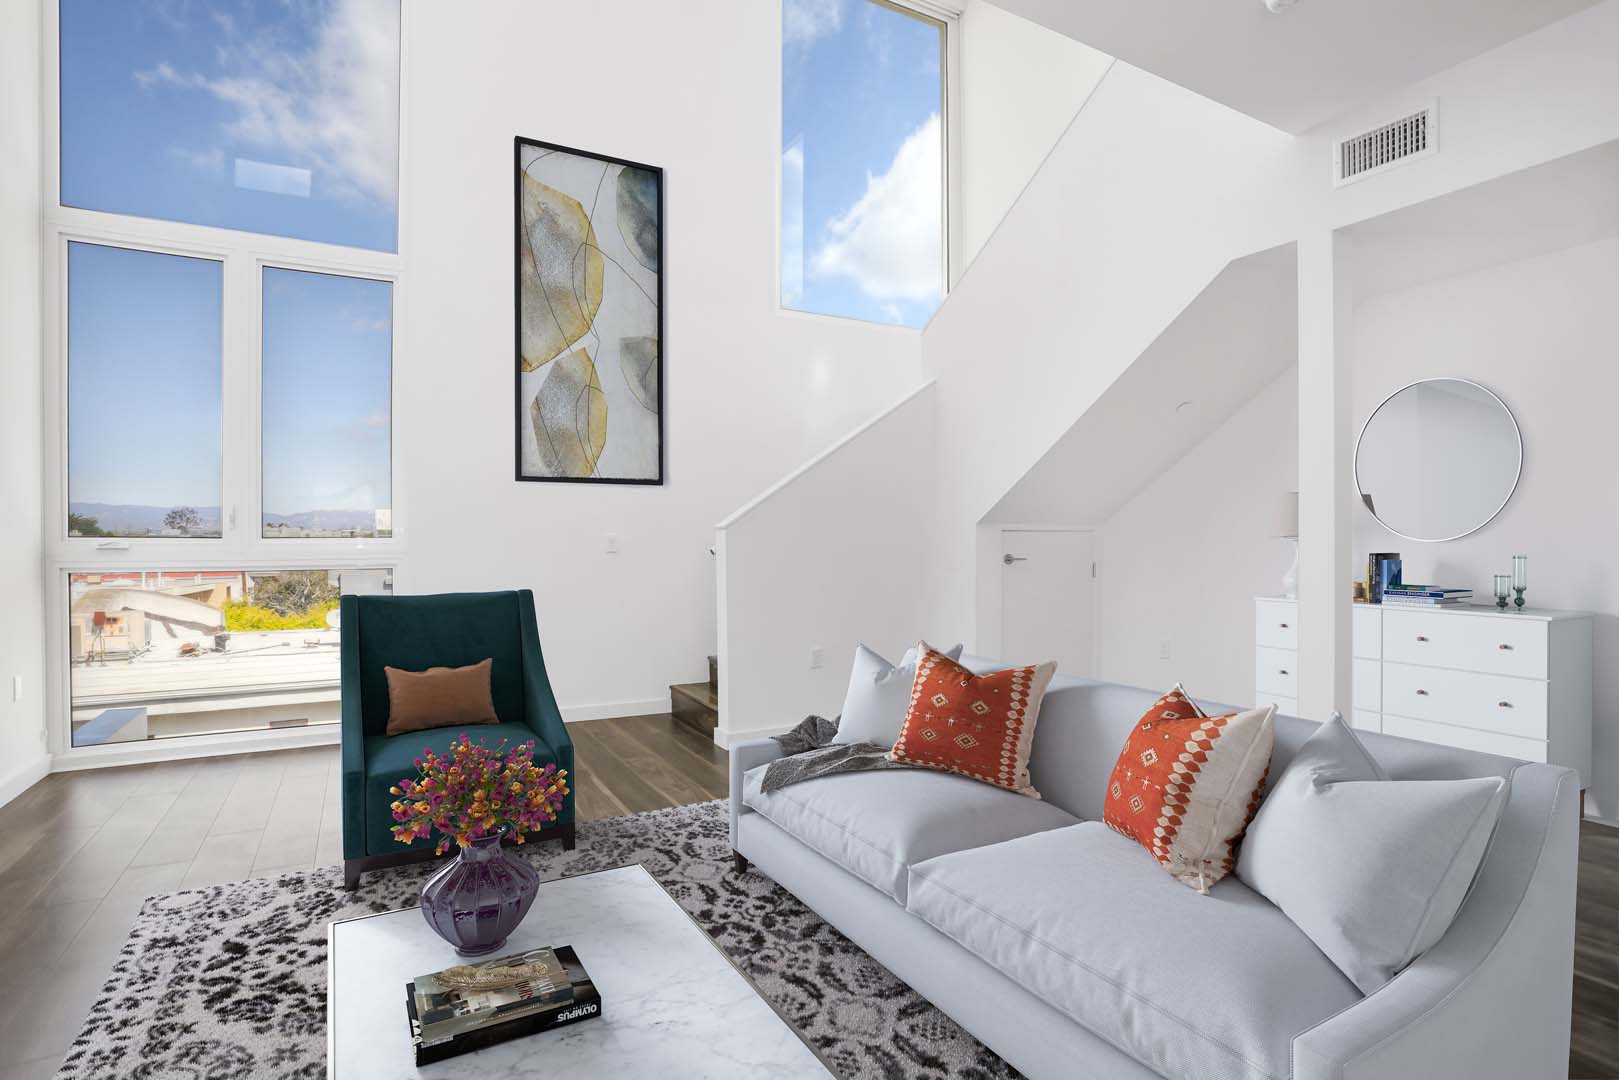 Culver City CA Luxury Apartments - Open Space Living Room with Hardwood Floors and Stylish Interior Featuring Large Windows and Staircase Leading to Second Floor